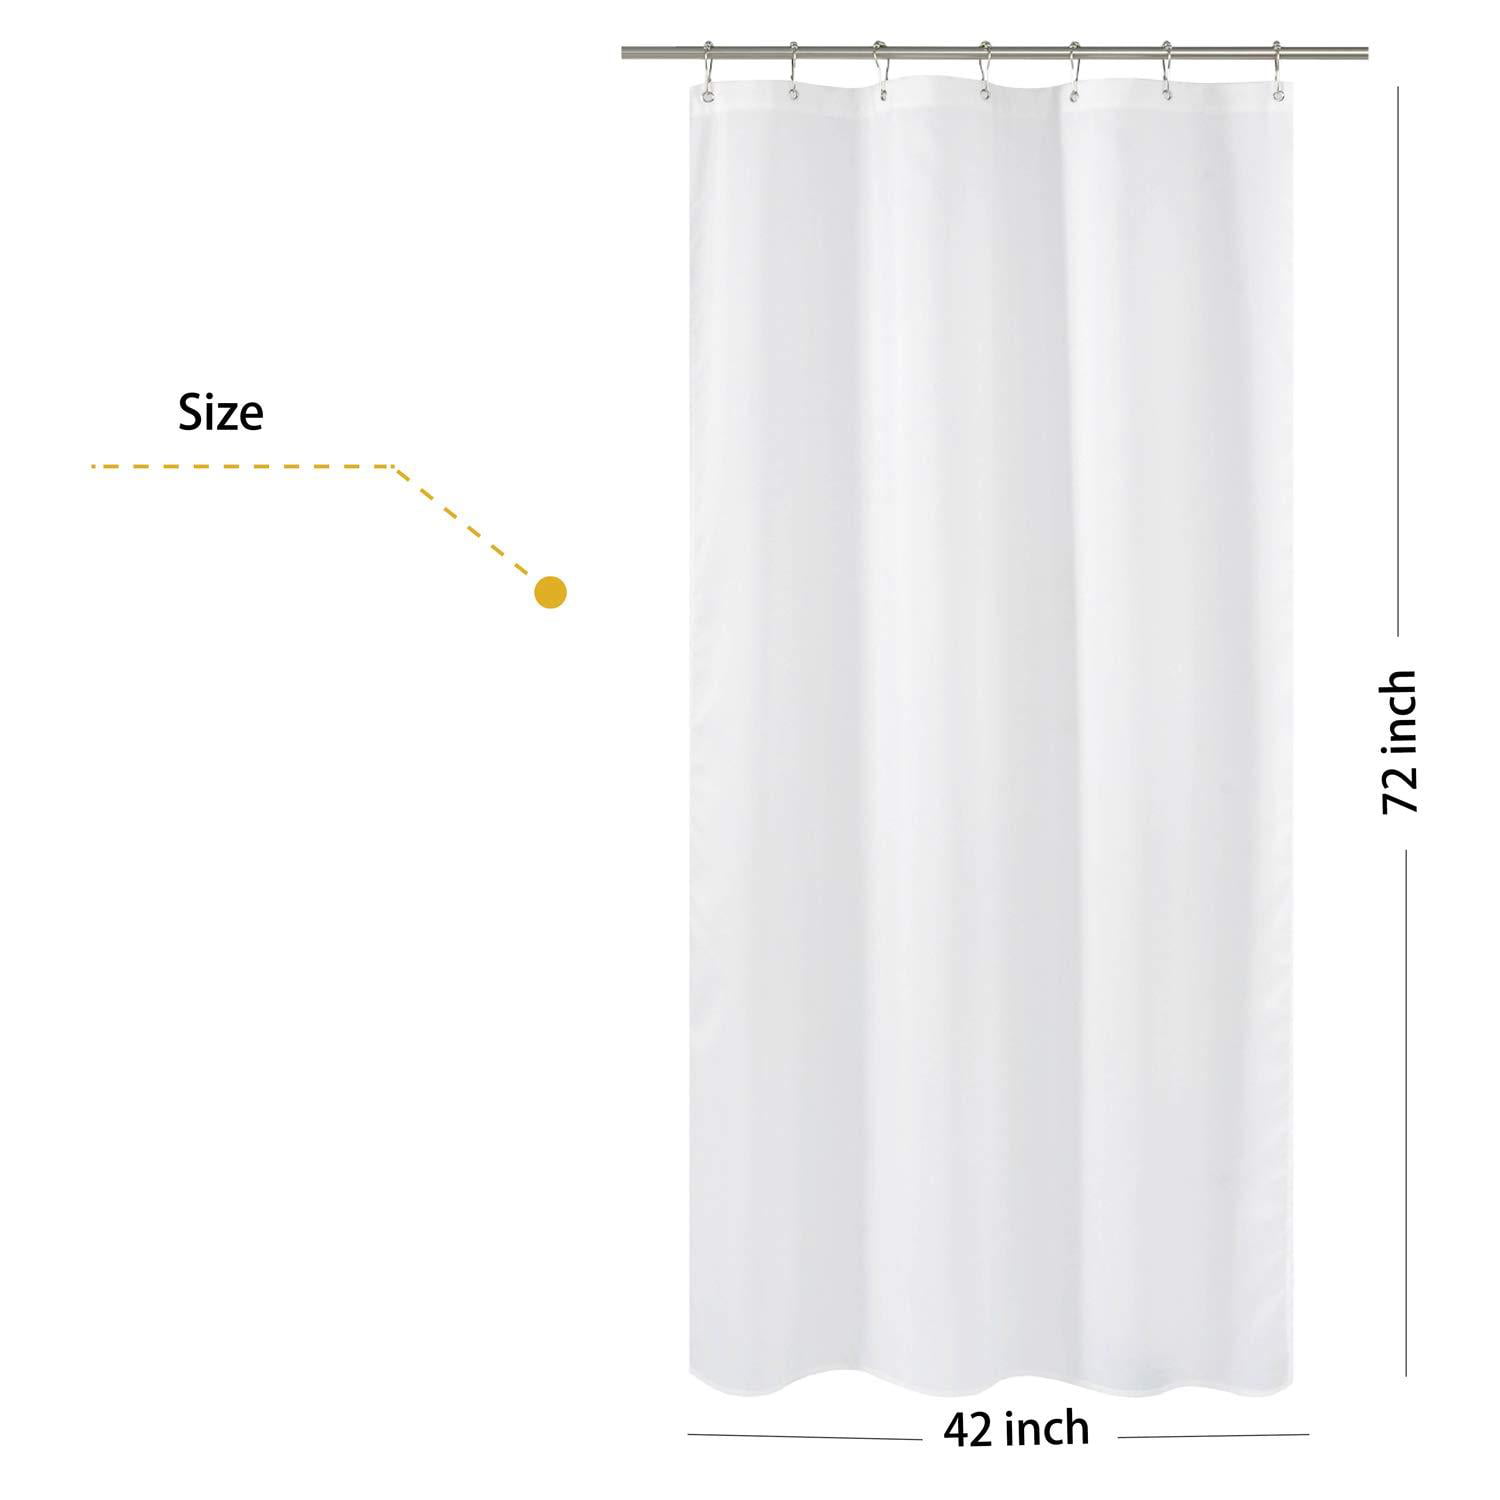 Fabric Shower Curtain Liner Stall Size, 76 Inch Wide Shower Curtain